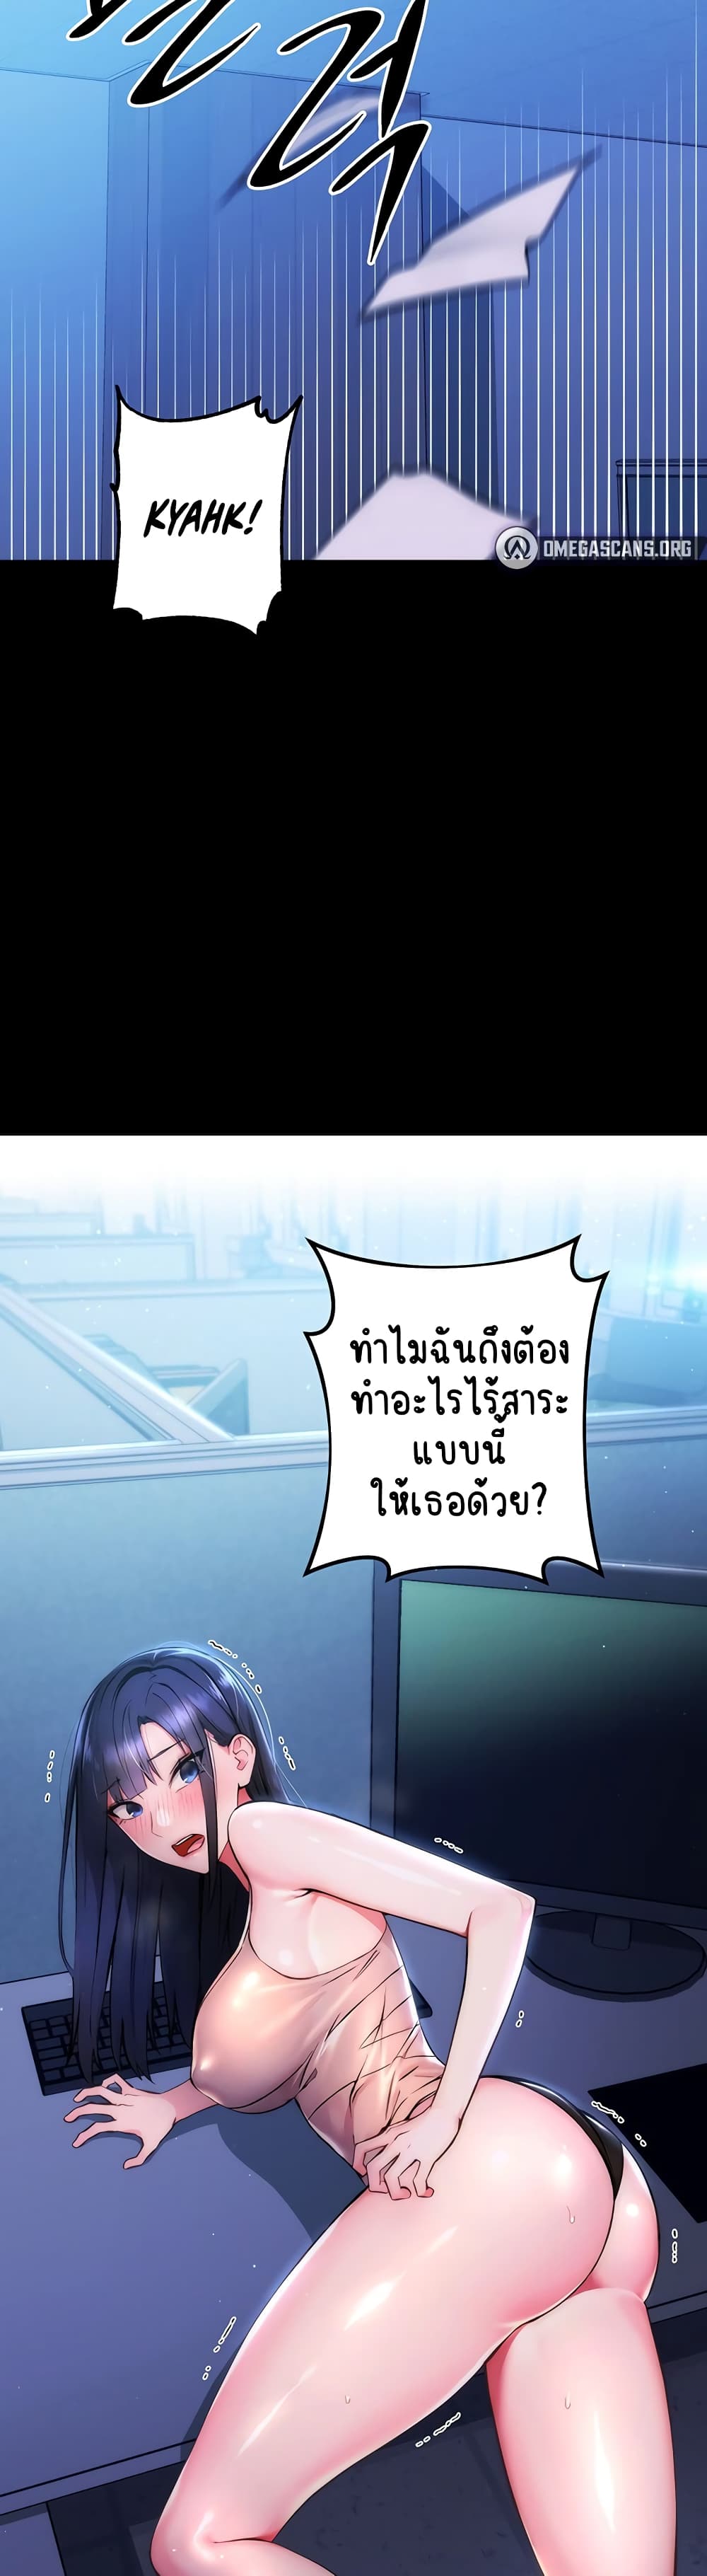 Outsider: The Invisible Man ตอนที่ 1 ภาพ 39